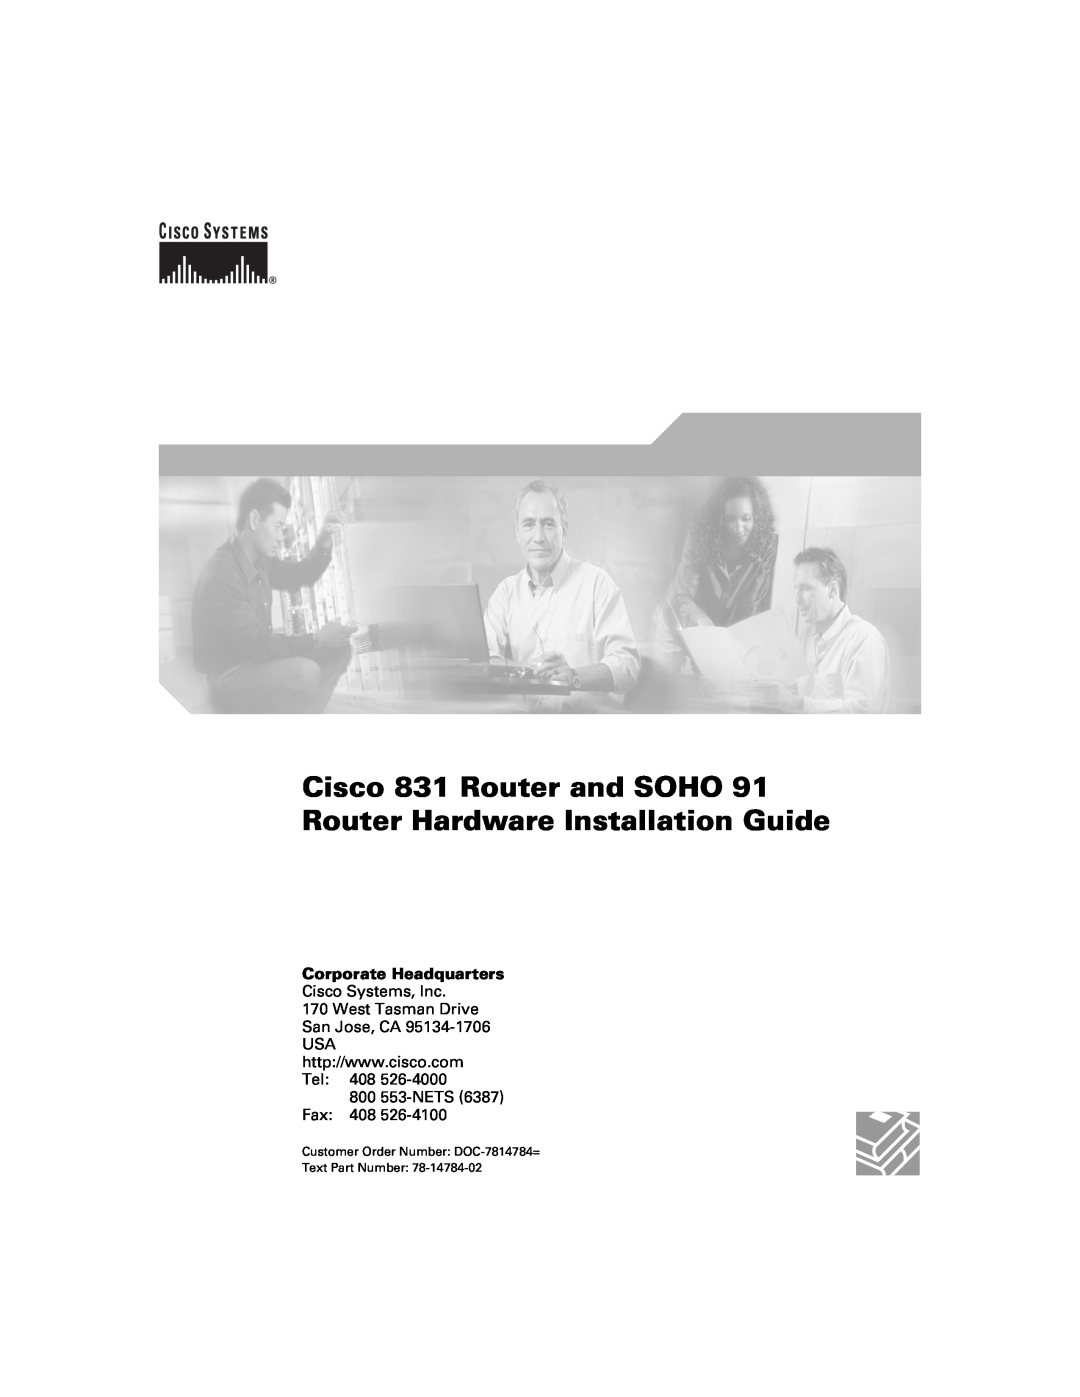 Cisco Systems 78-14784-02 manual Cisco 831 Router and SOHO 91 Router Hardware Installation Guide, Corporate Headquarters 